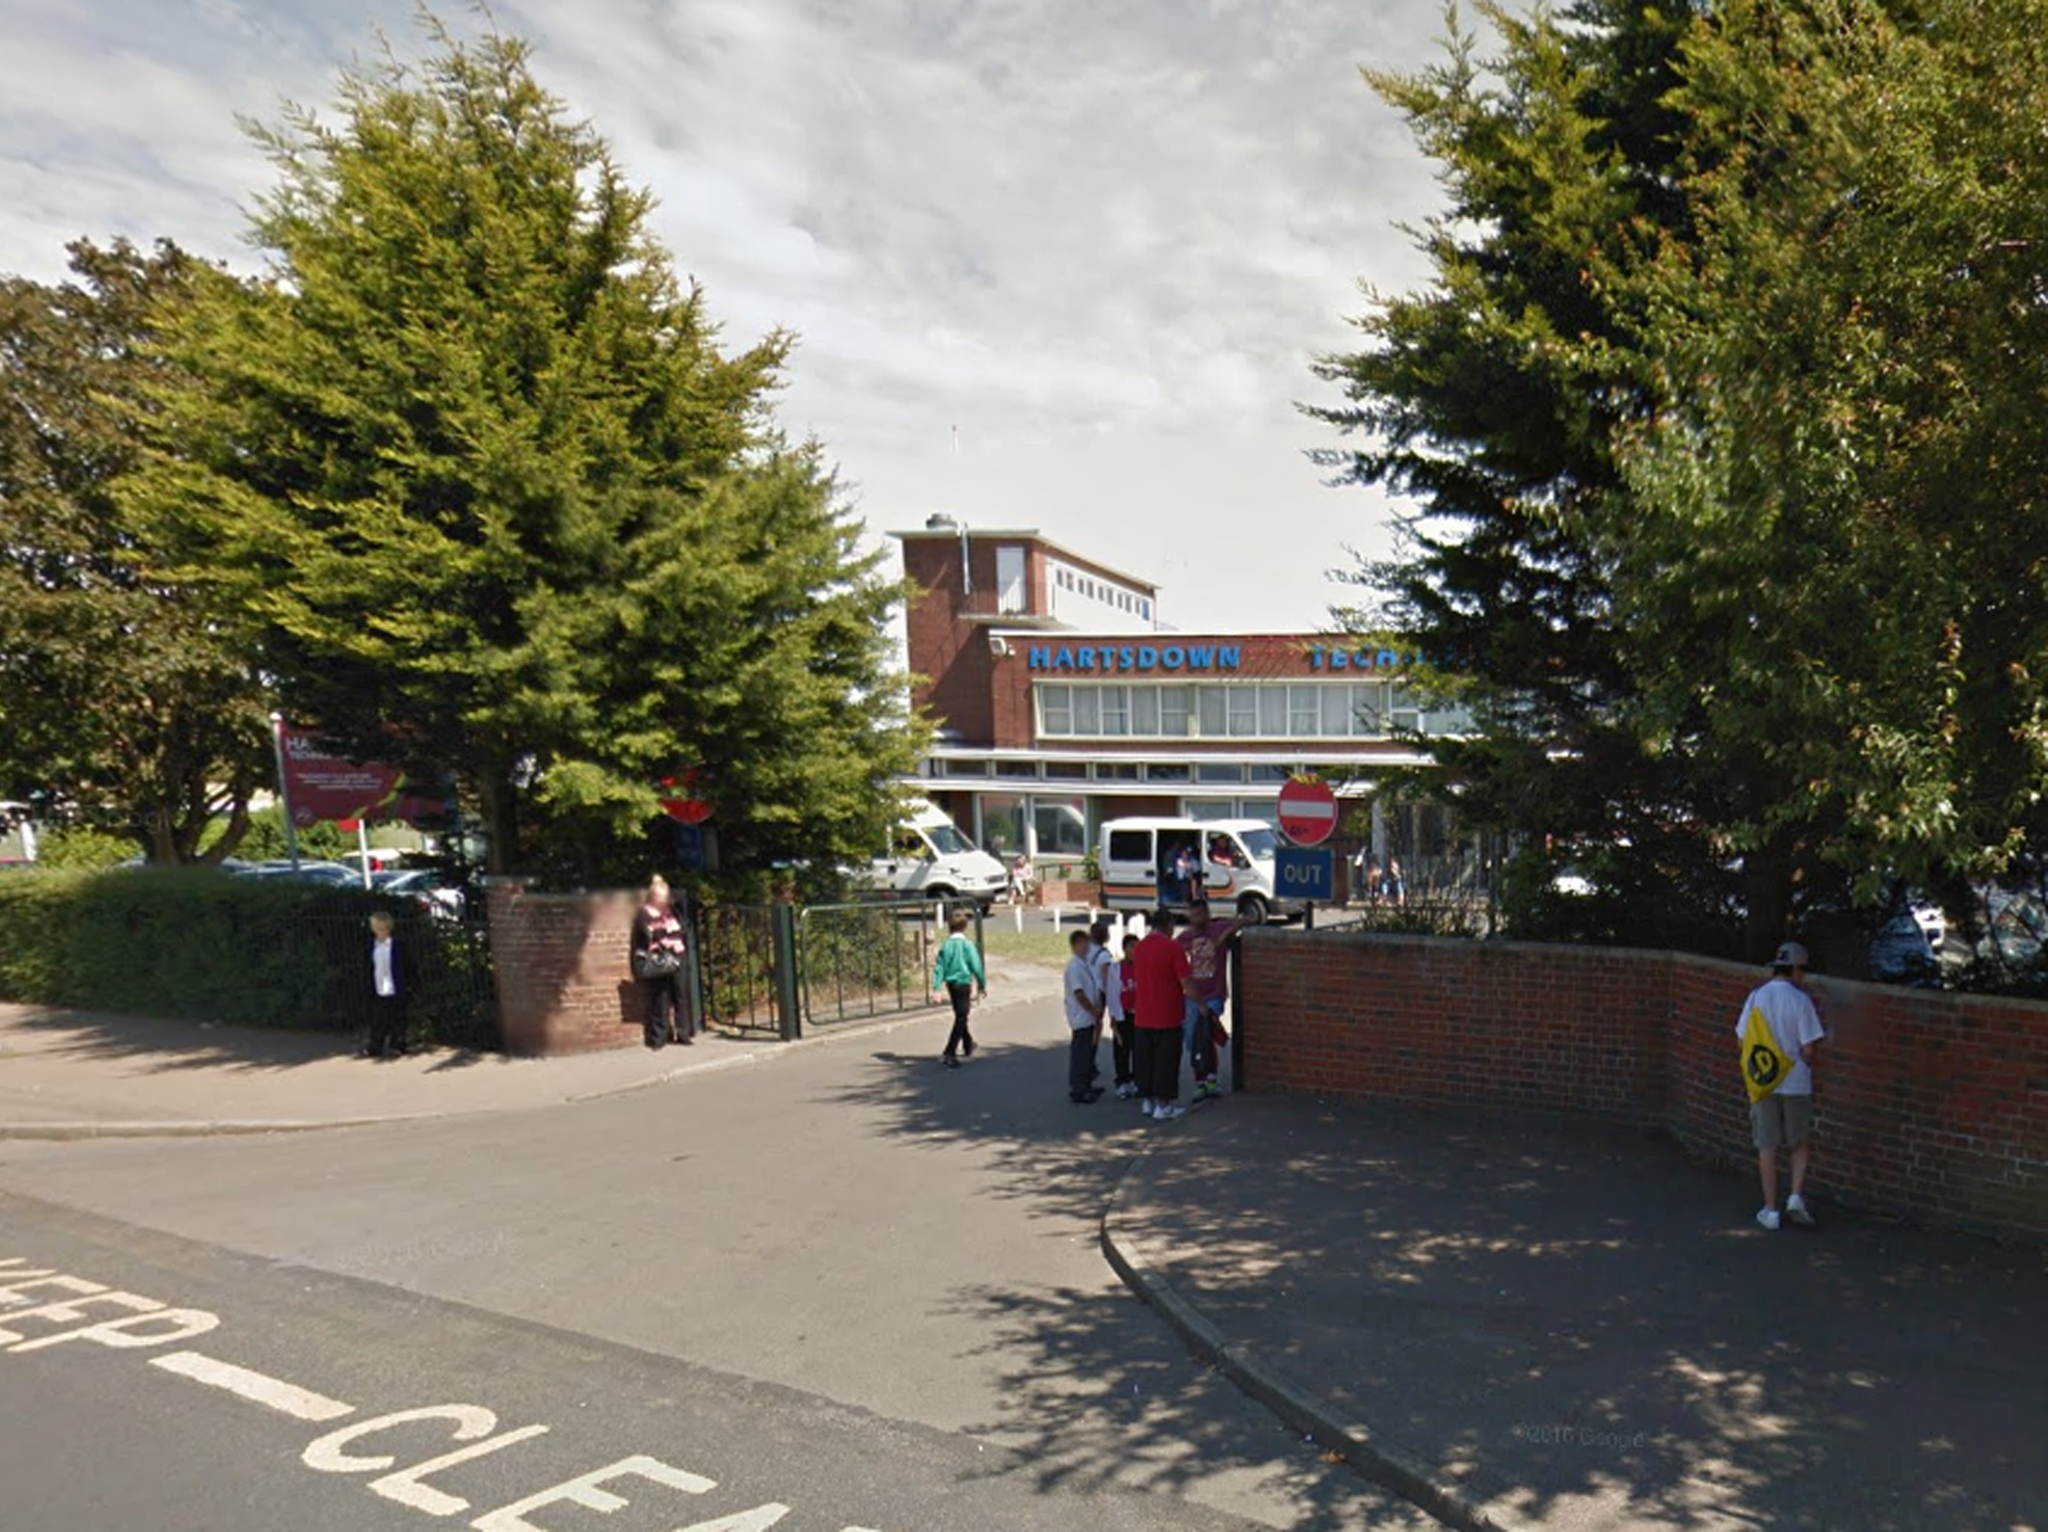 Kent Police received a report of disturbance at the school gates